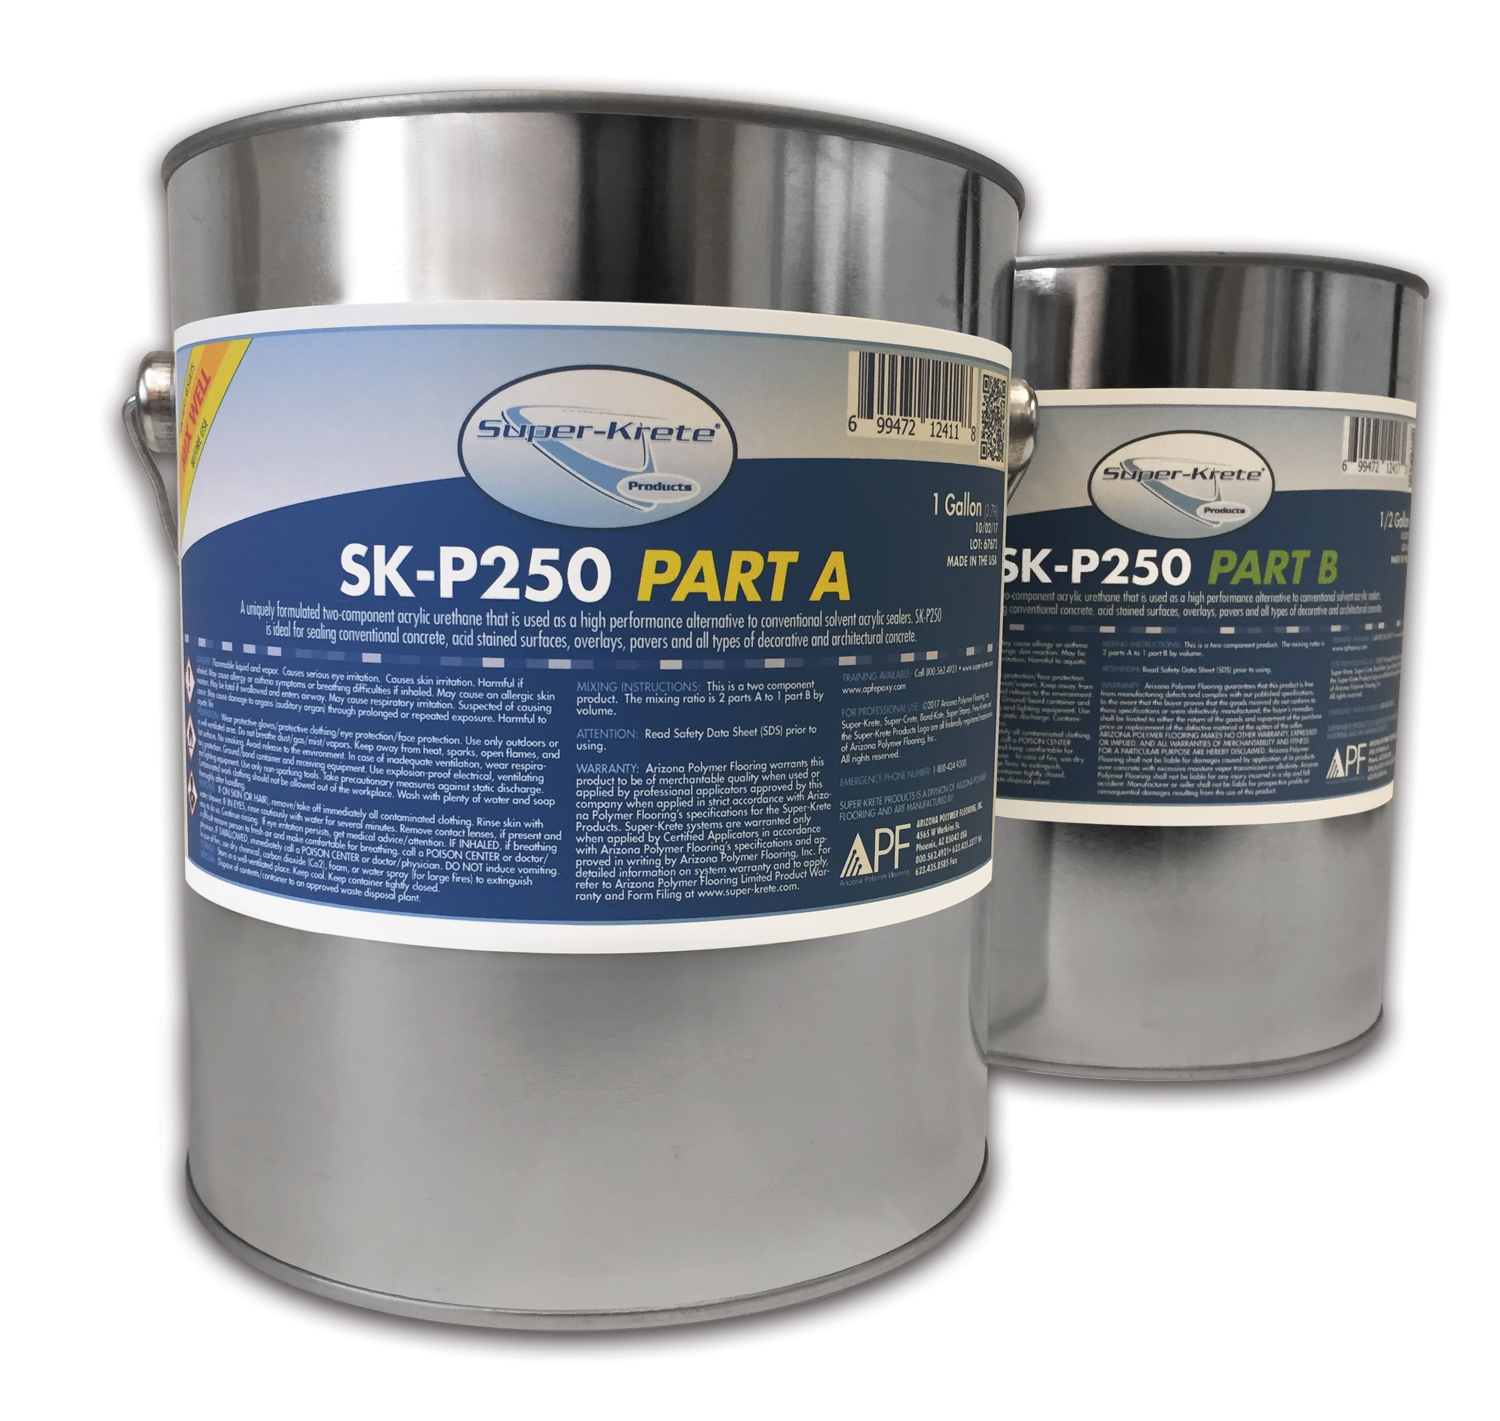 As a primer, SK-P250 is formulated with a superior adhesion promoter, allowing it to adhere to properly prepared cementitious and select masonry surfaces. Unlike other polyurethanes, SK-P250 bonds tenaciously to cementitious and select masonry substrates.